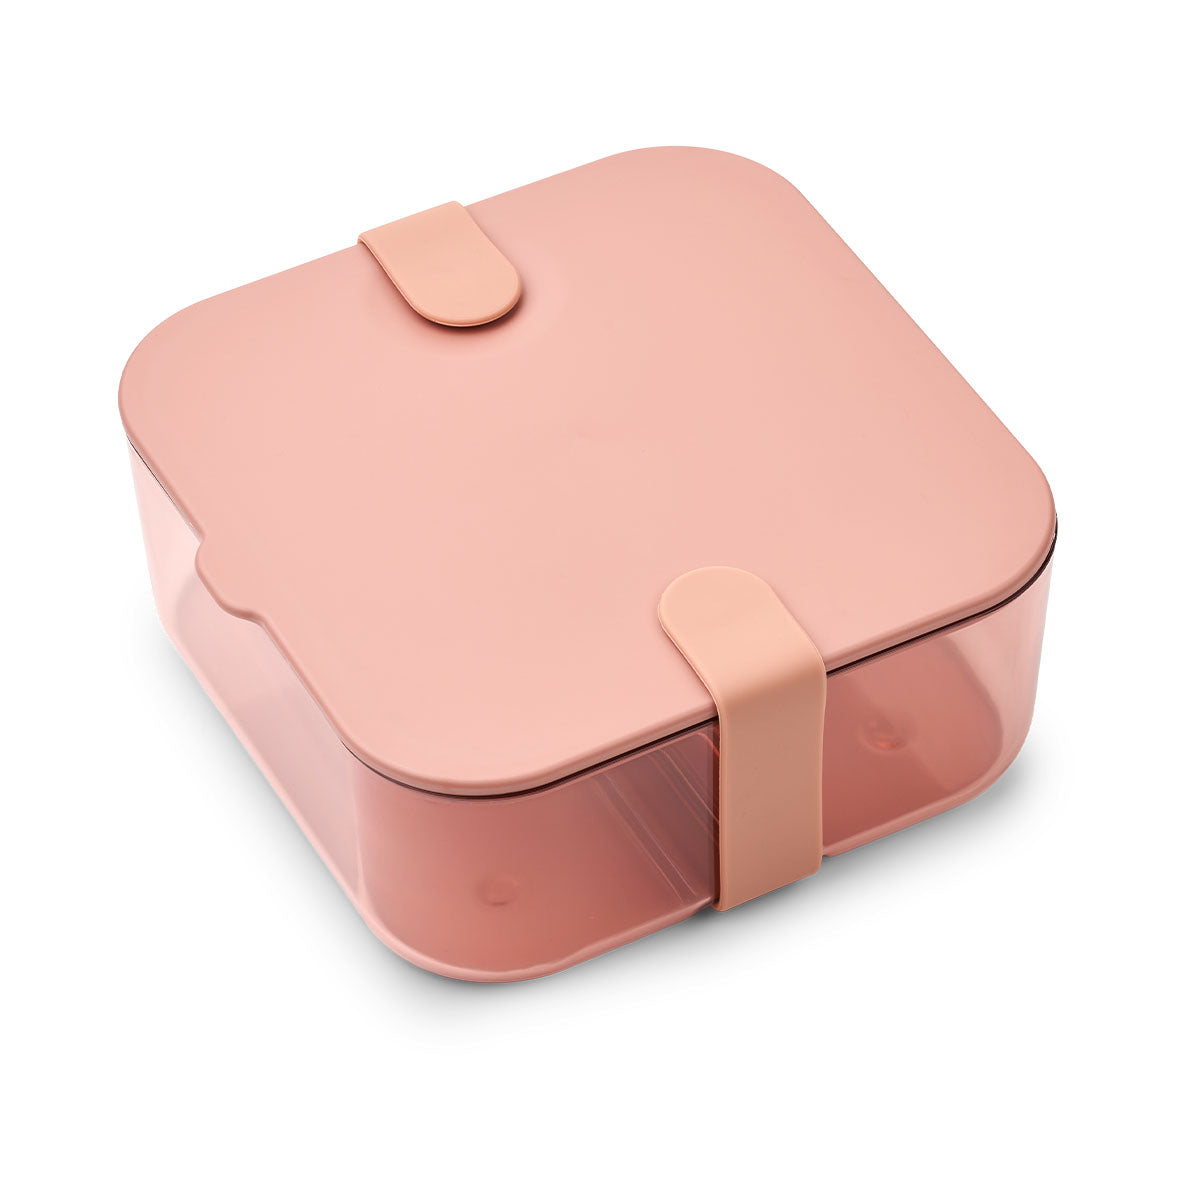 Liewood carin lunch box small tuscany rose/dusty raspberry